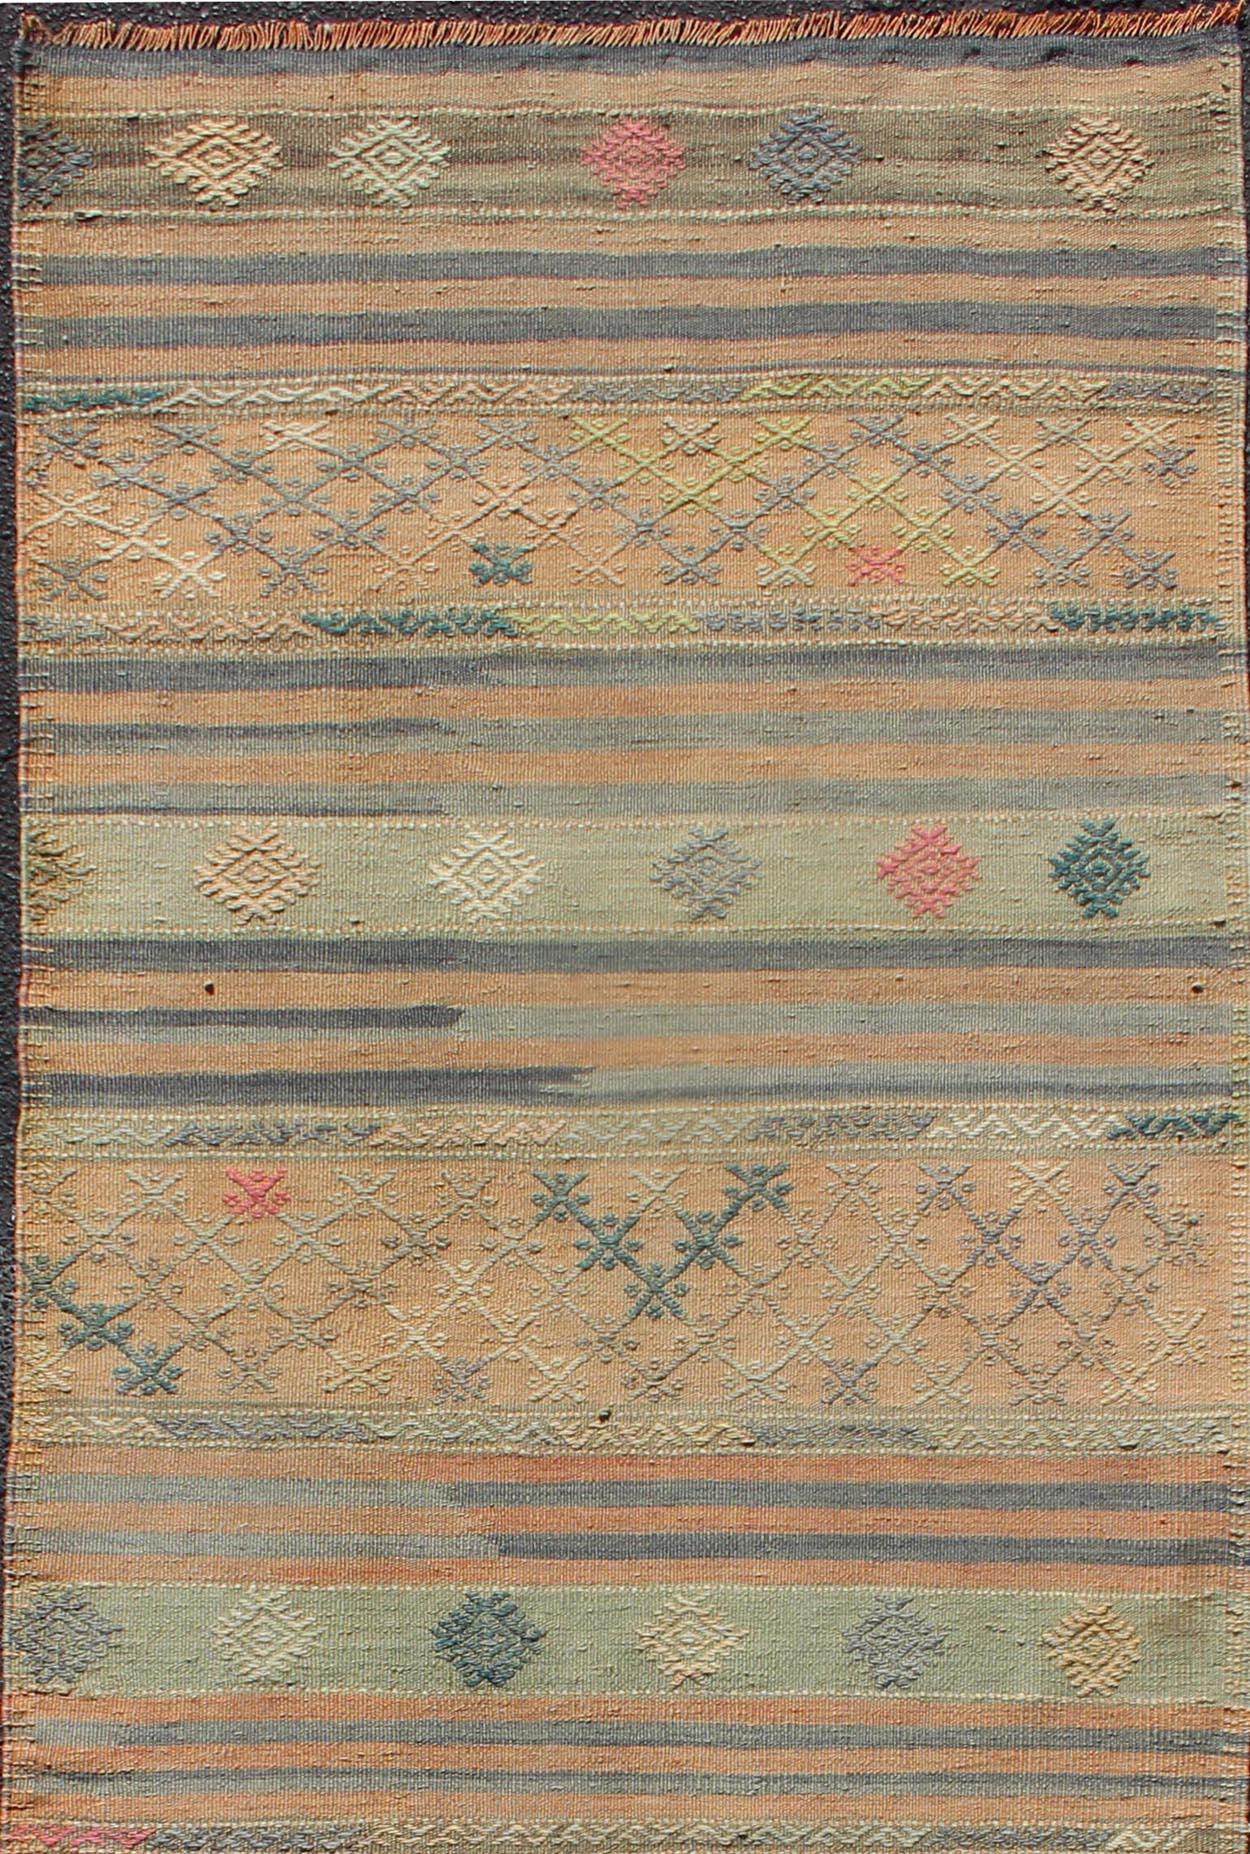 Vintage Turkish Kilim runner with geometric shapes and colorful stripes, Keivan Woven Arts / rug TU-NED-627, country of origin / type: turkey / Kilim, circa mid-20th century

Featuring geometric shapes rendered in a repeating horizontal stripe